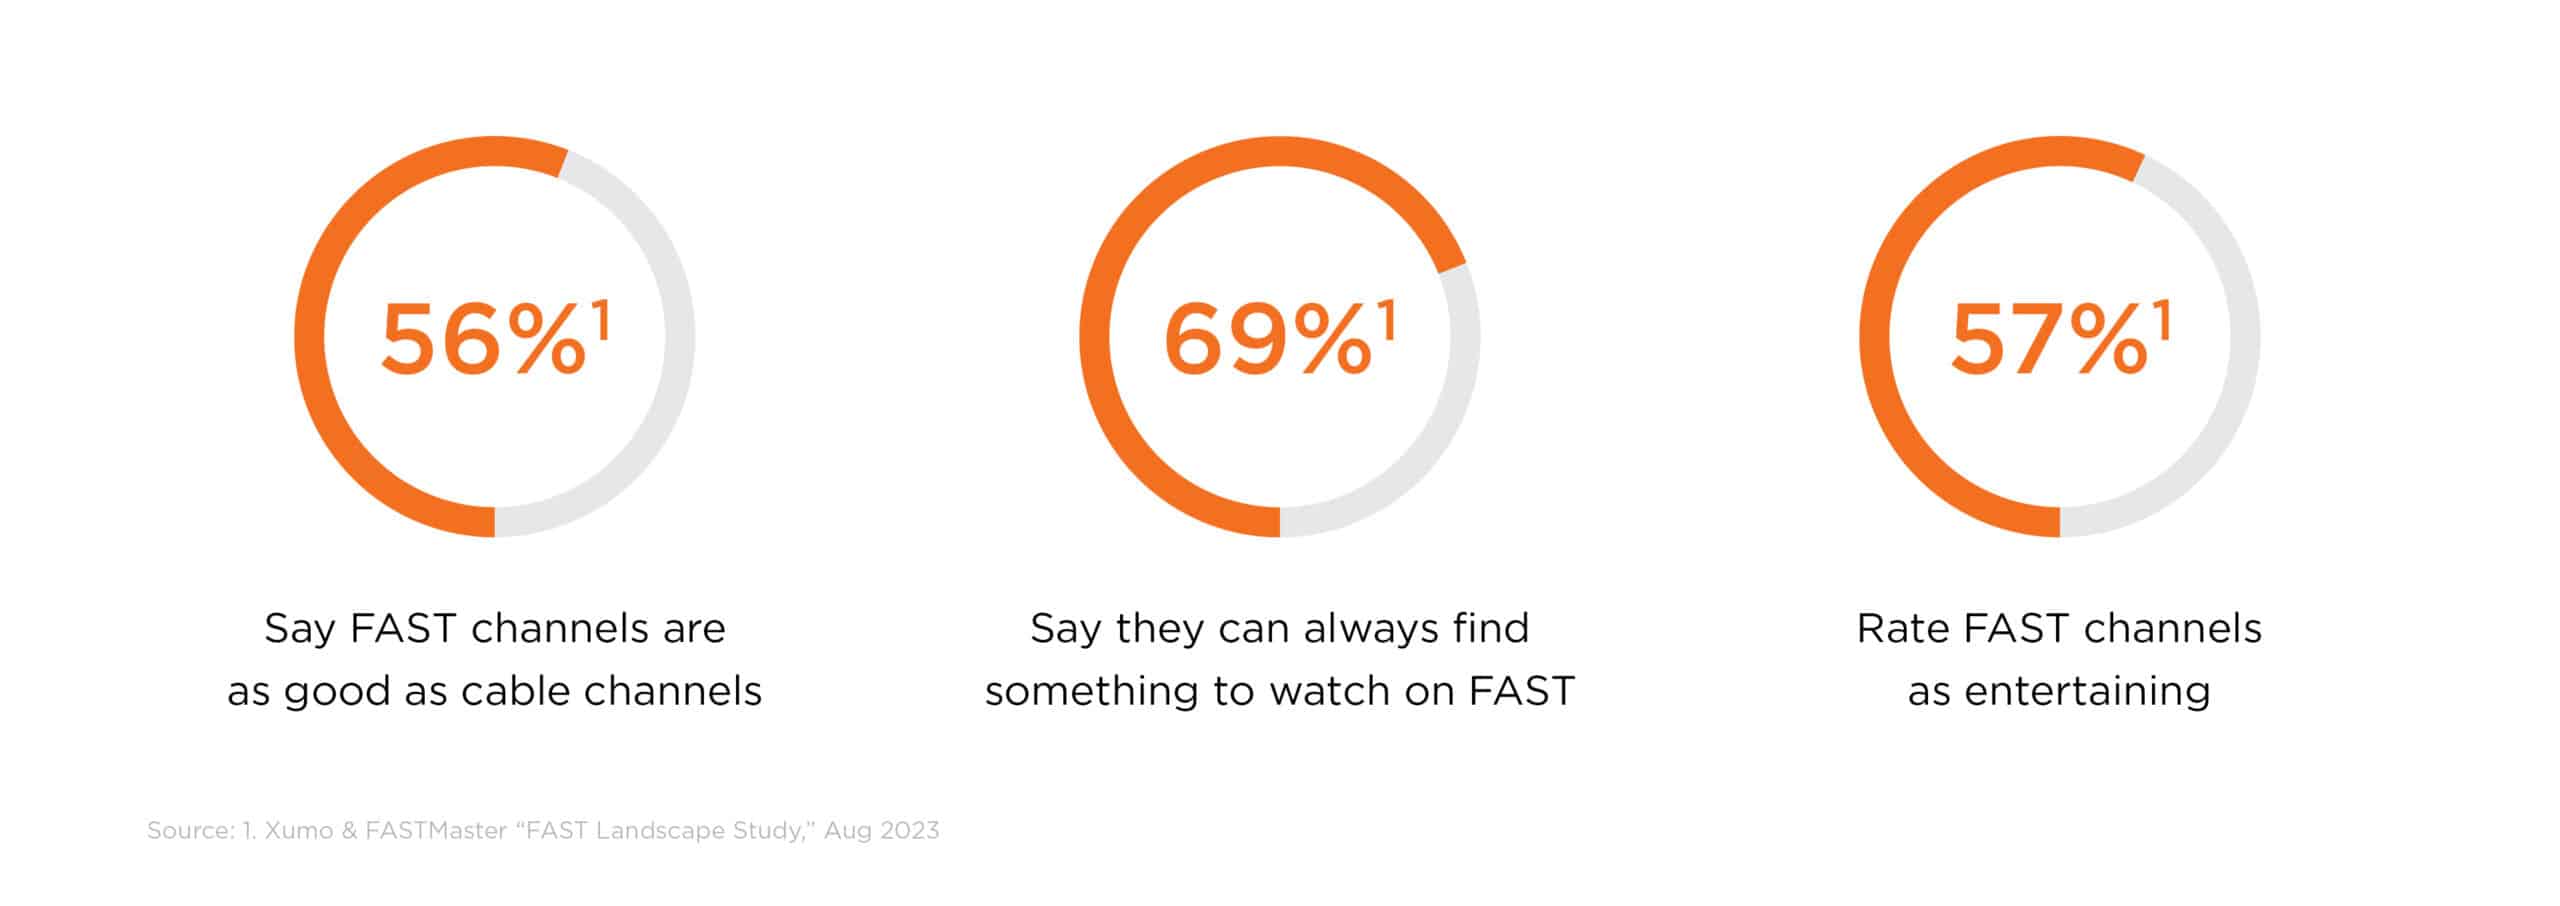 Three speech bubbles calling out facts on streaming. Speech bubble 1 on the left reads "56% say FAST channels are as good as cable channels". Speech bubble 2 in the middle reads "69% say they can always find something to watch on FAST". Speech bubble 3 on the right reads "57% rate FAST channels as entertaining".